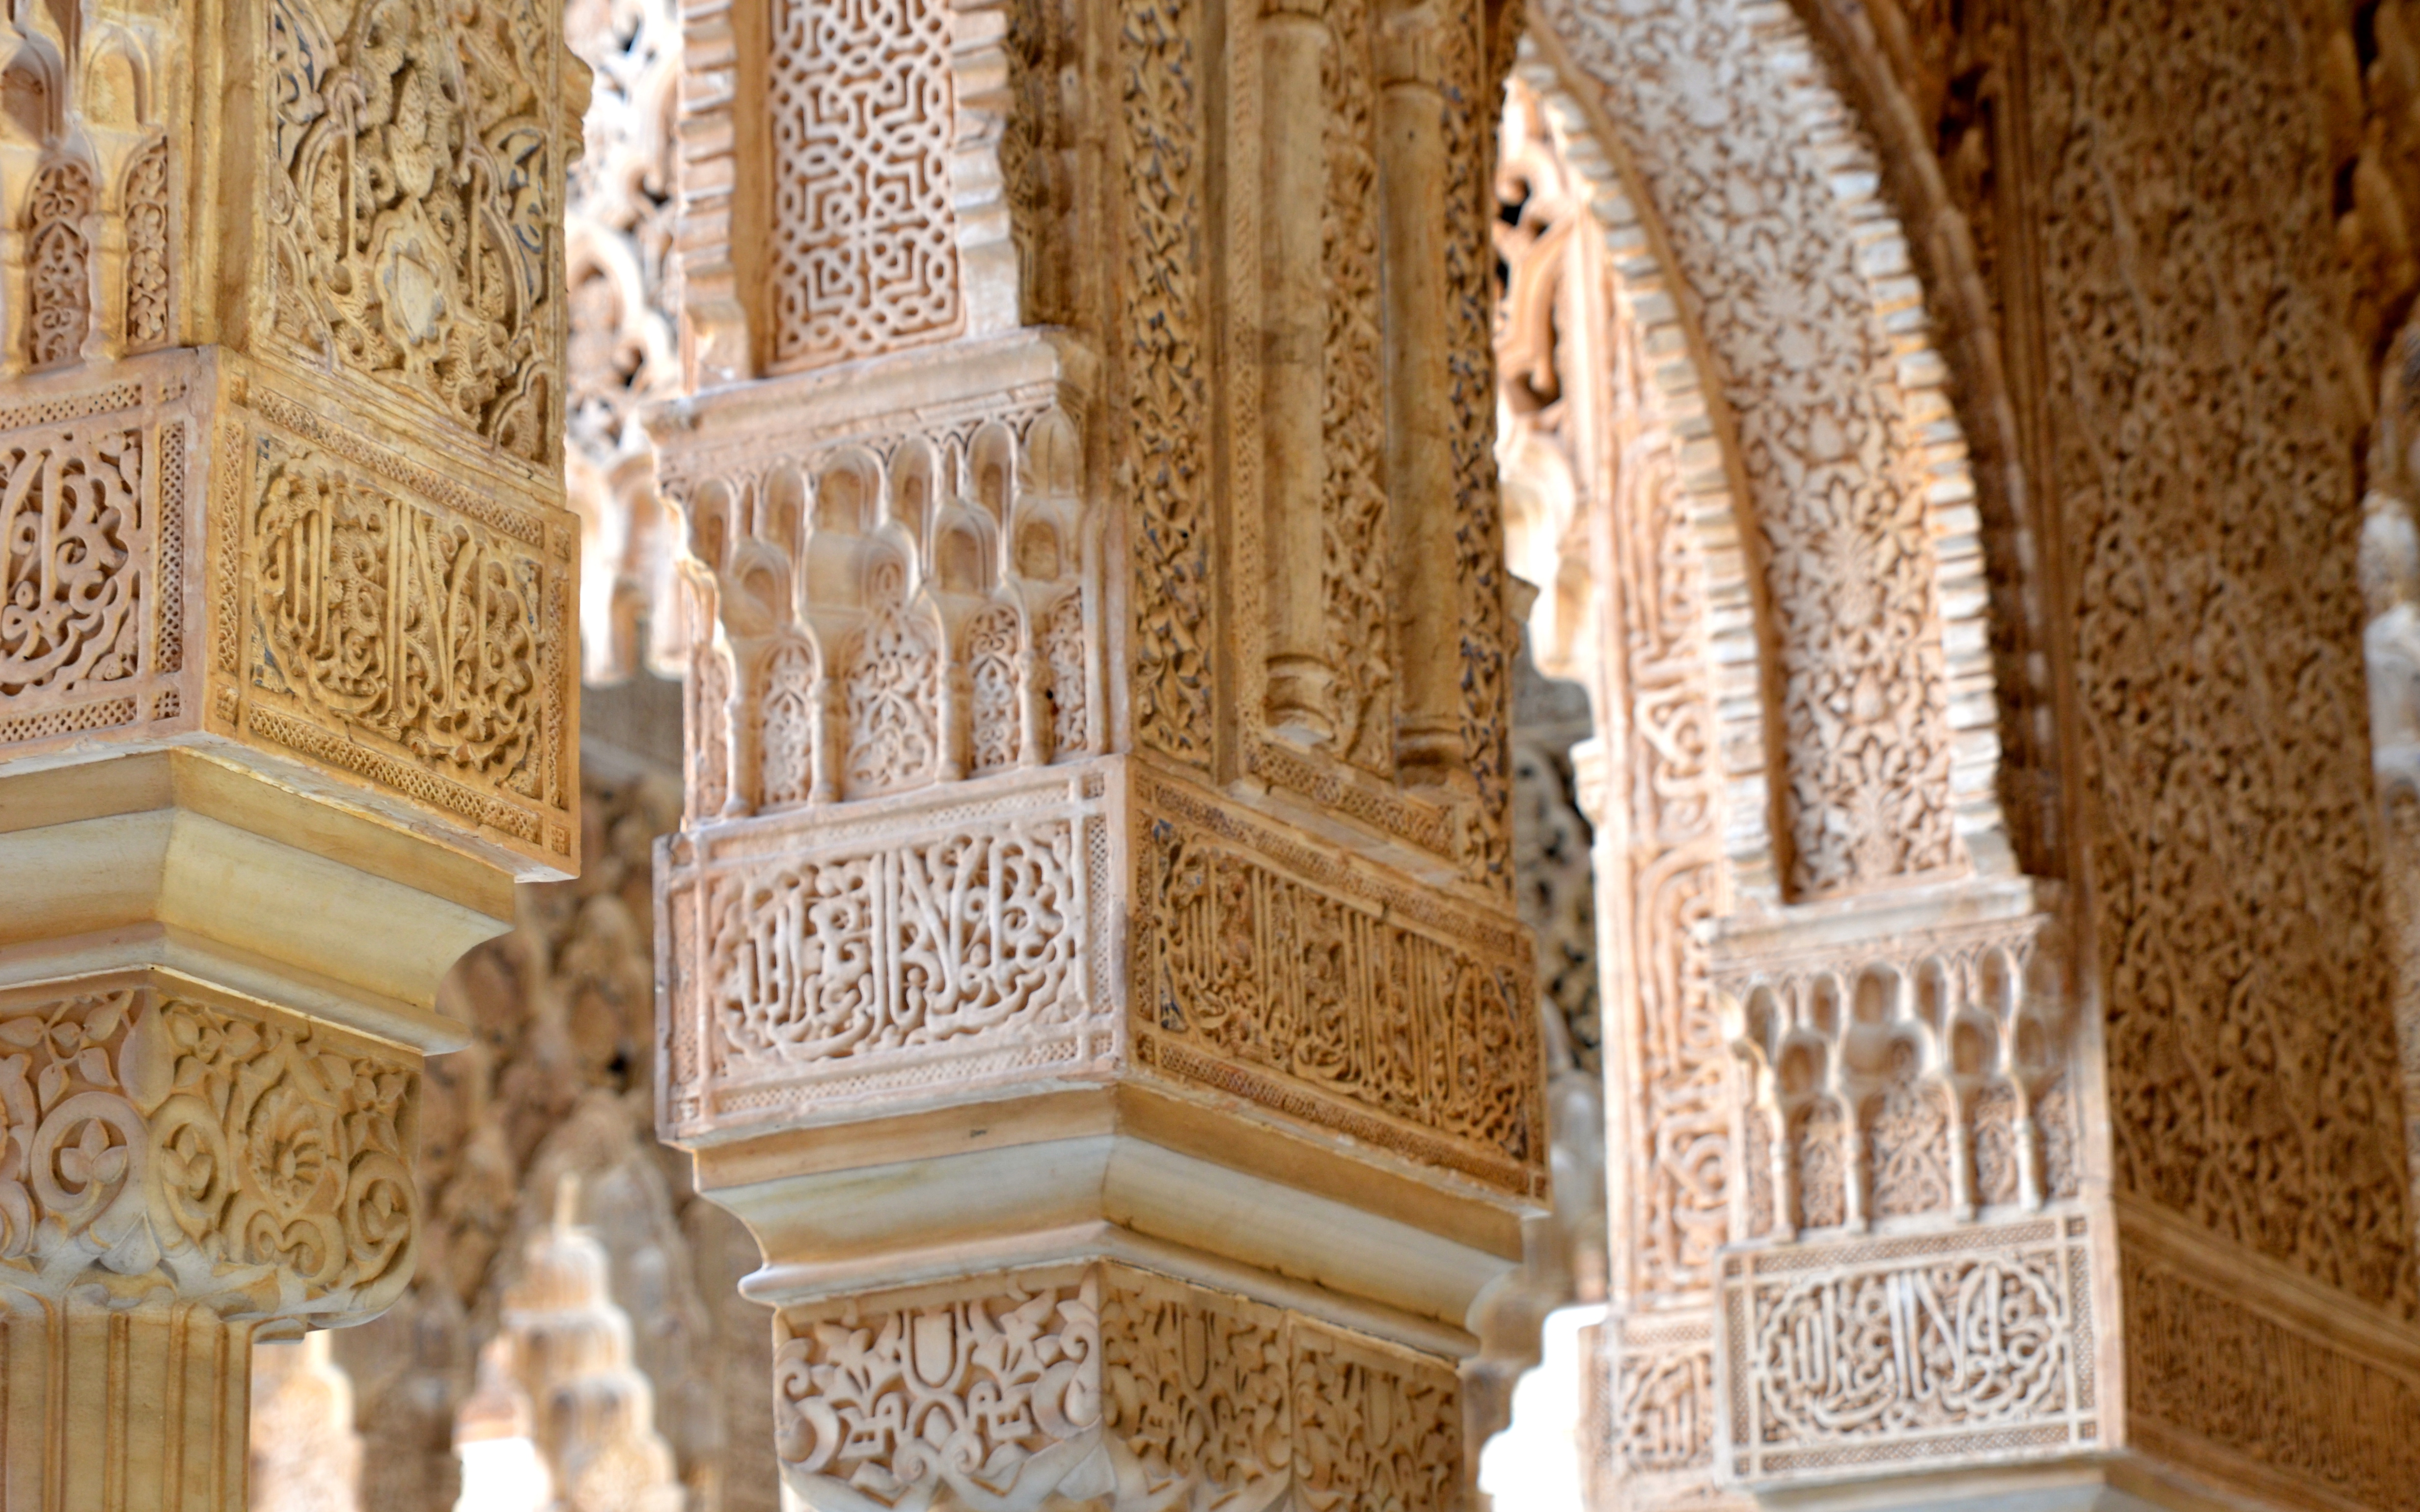 The Alhambra…an architectural masterpiece in Granada, Spain